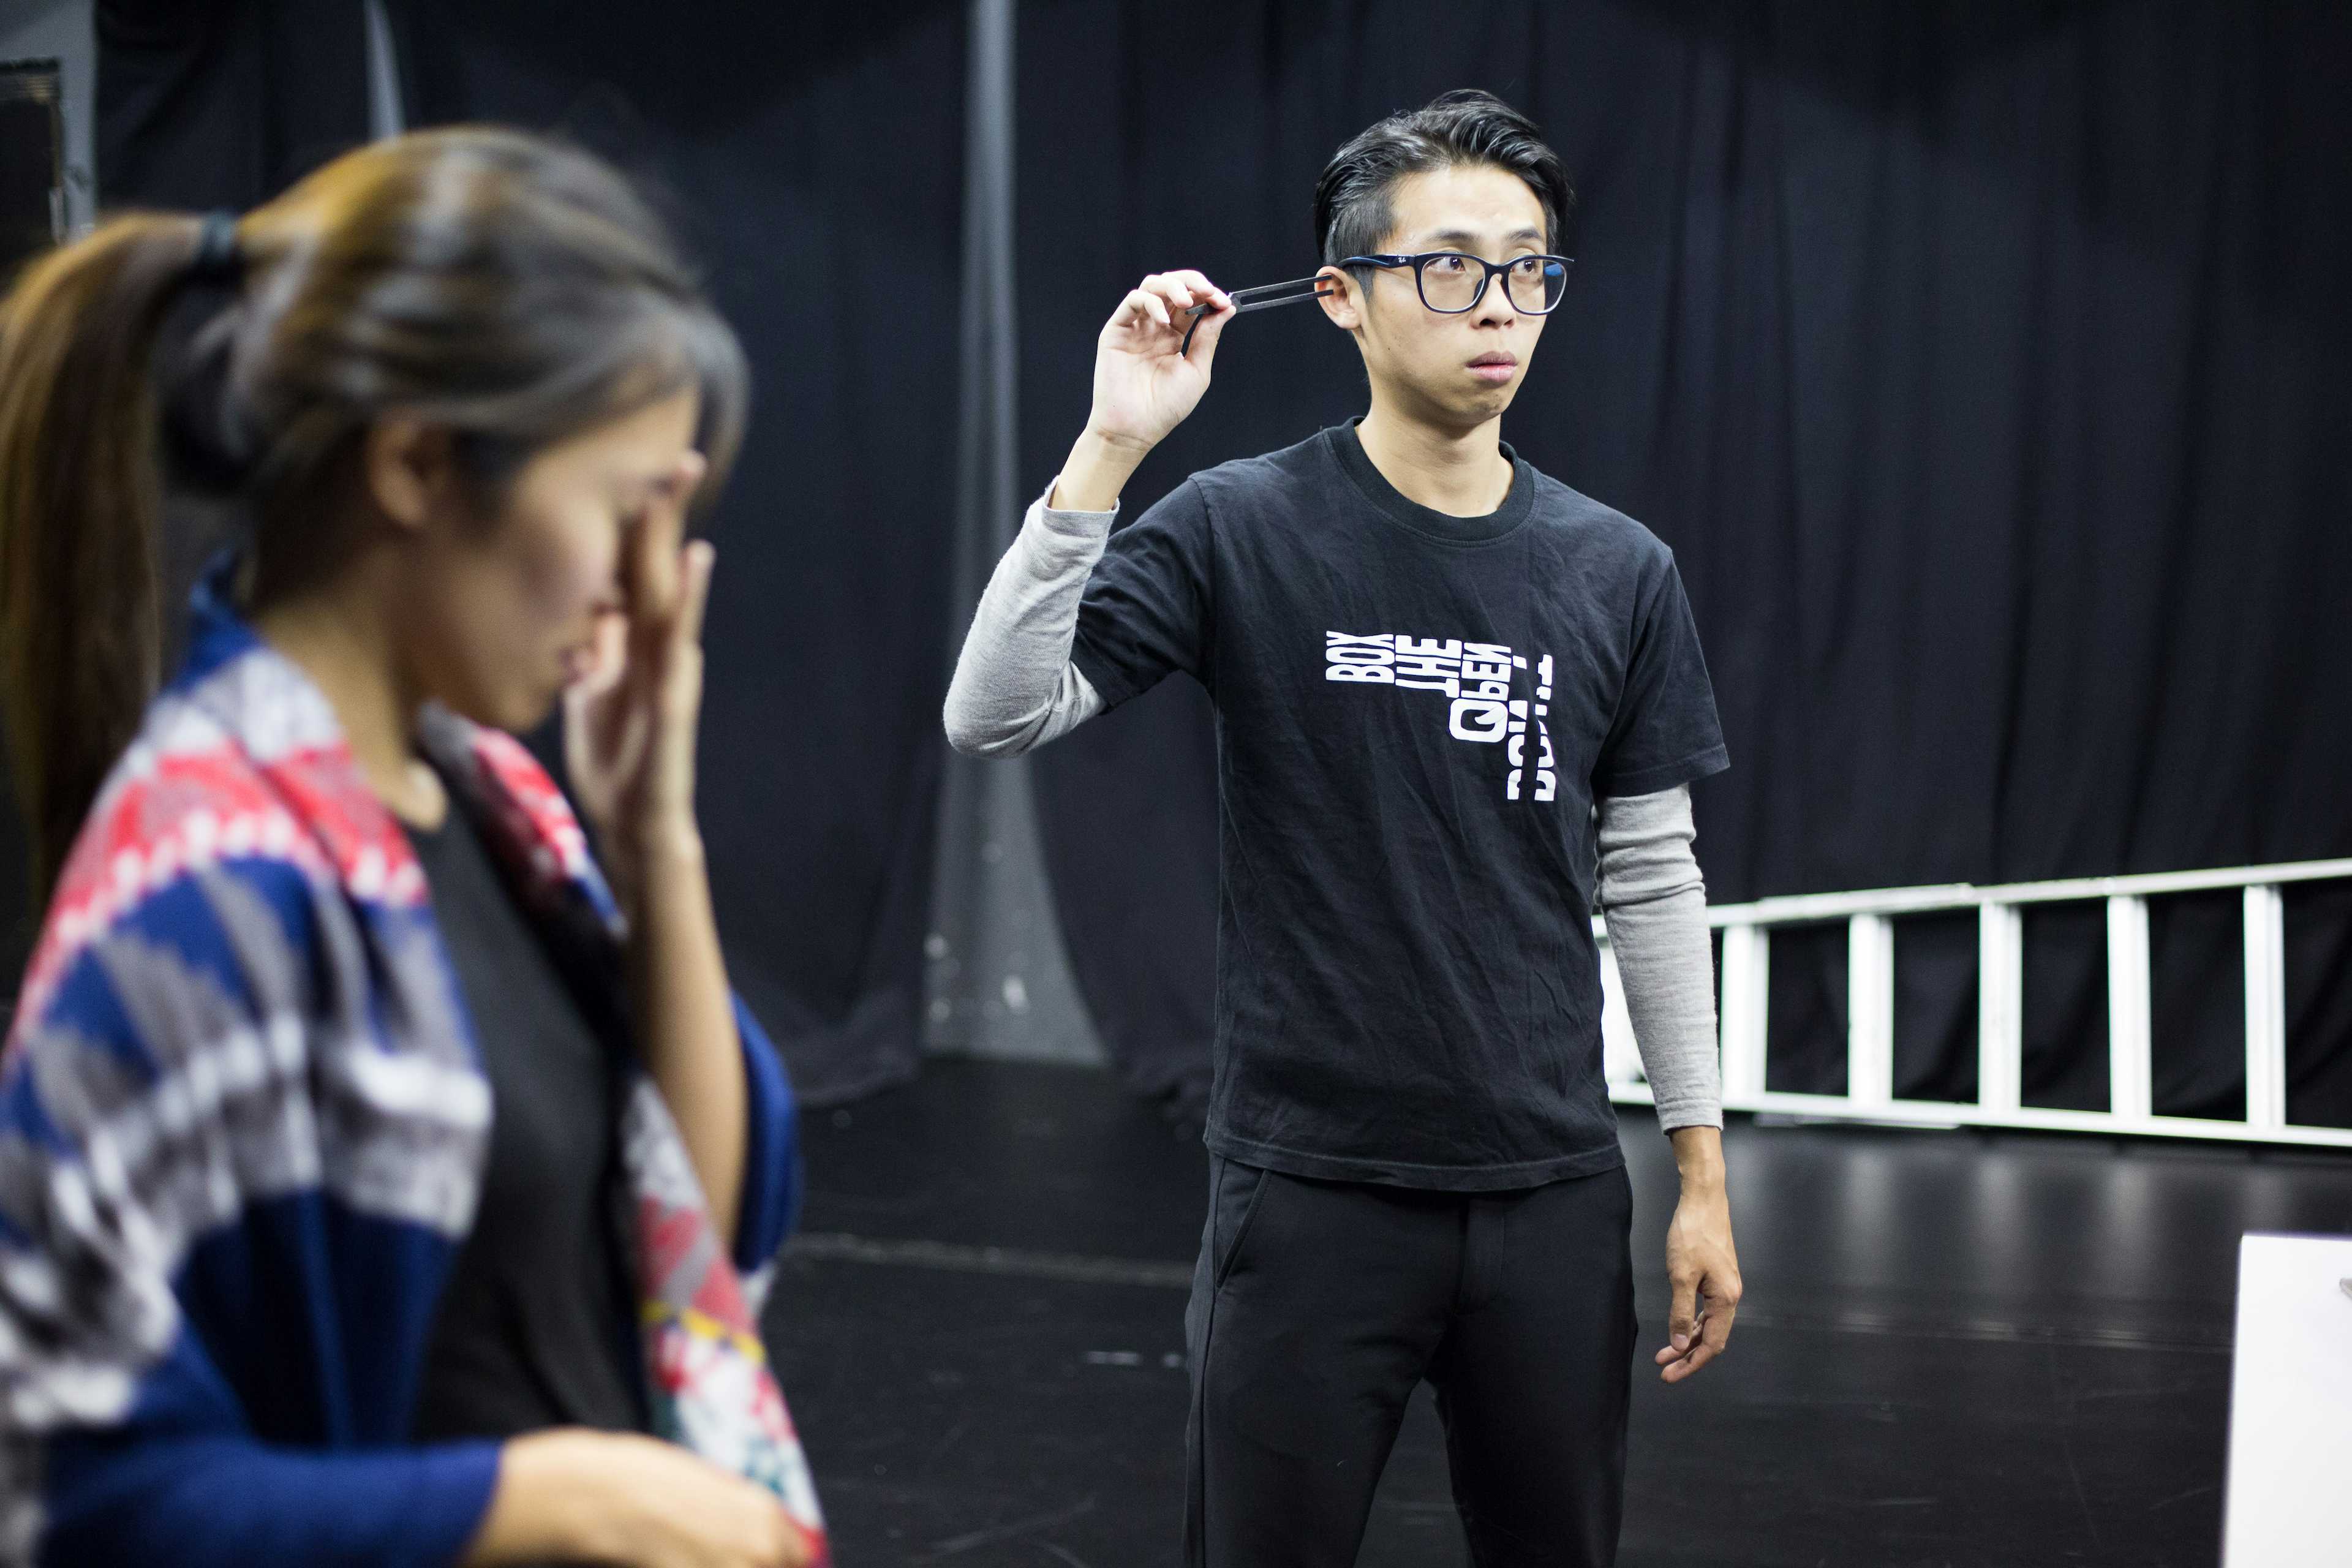  | Featuring: Chiu Chin Hei, Isabella Leung | Tagged as: Polyphonic Song: Voice and Theatre Practice | Photo: Ivor Houlker |  (Rooftop Productions • Hong Kong Theatre Company)  | Rooftop Productions • Hong Kong Theatre Company